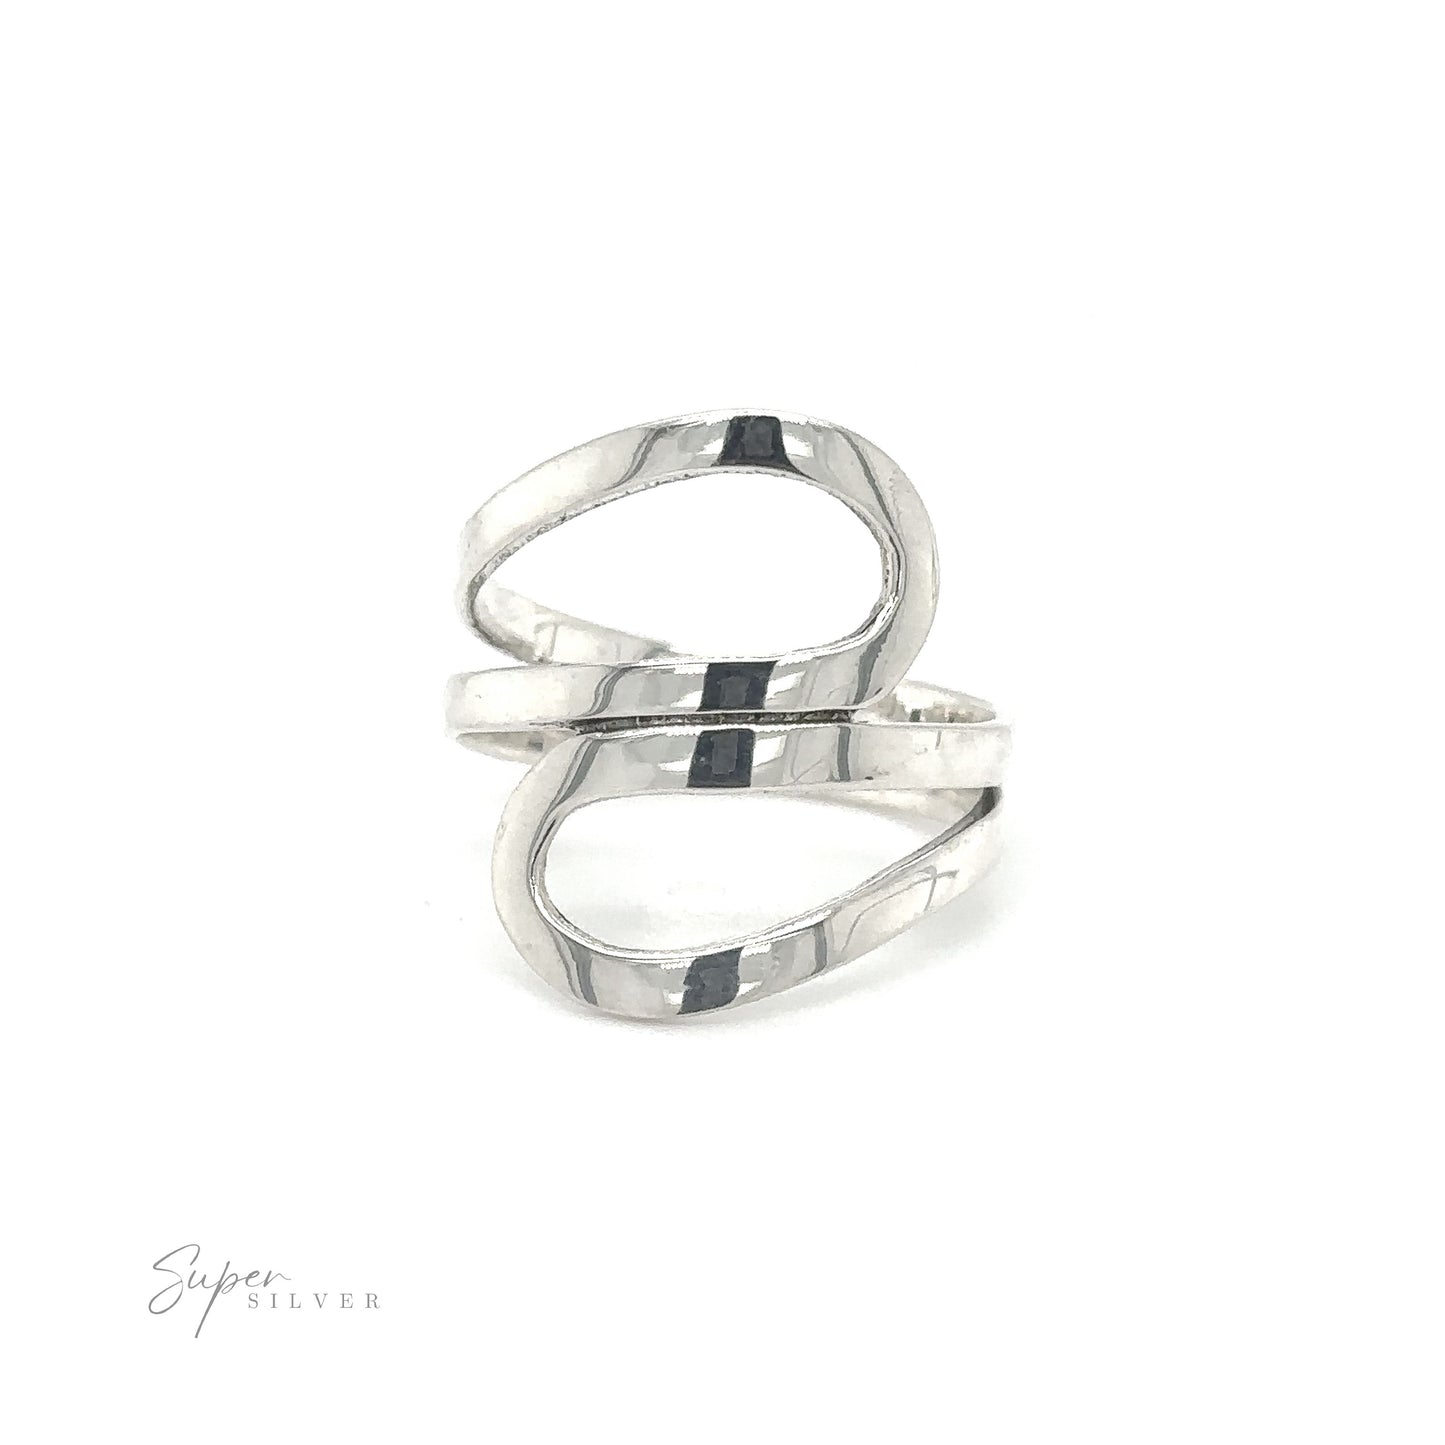 A versatile Freestyle Loop Ring with an oblong shape.